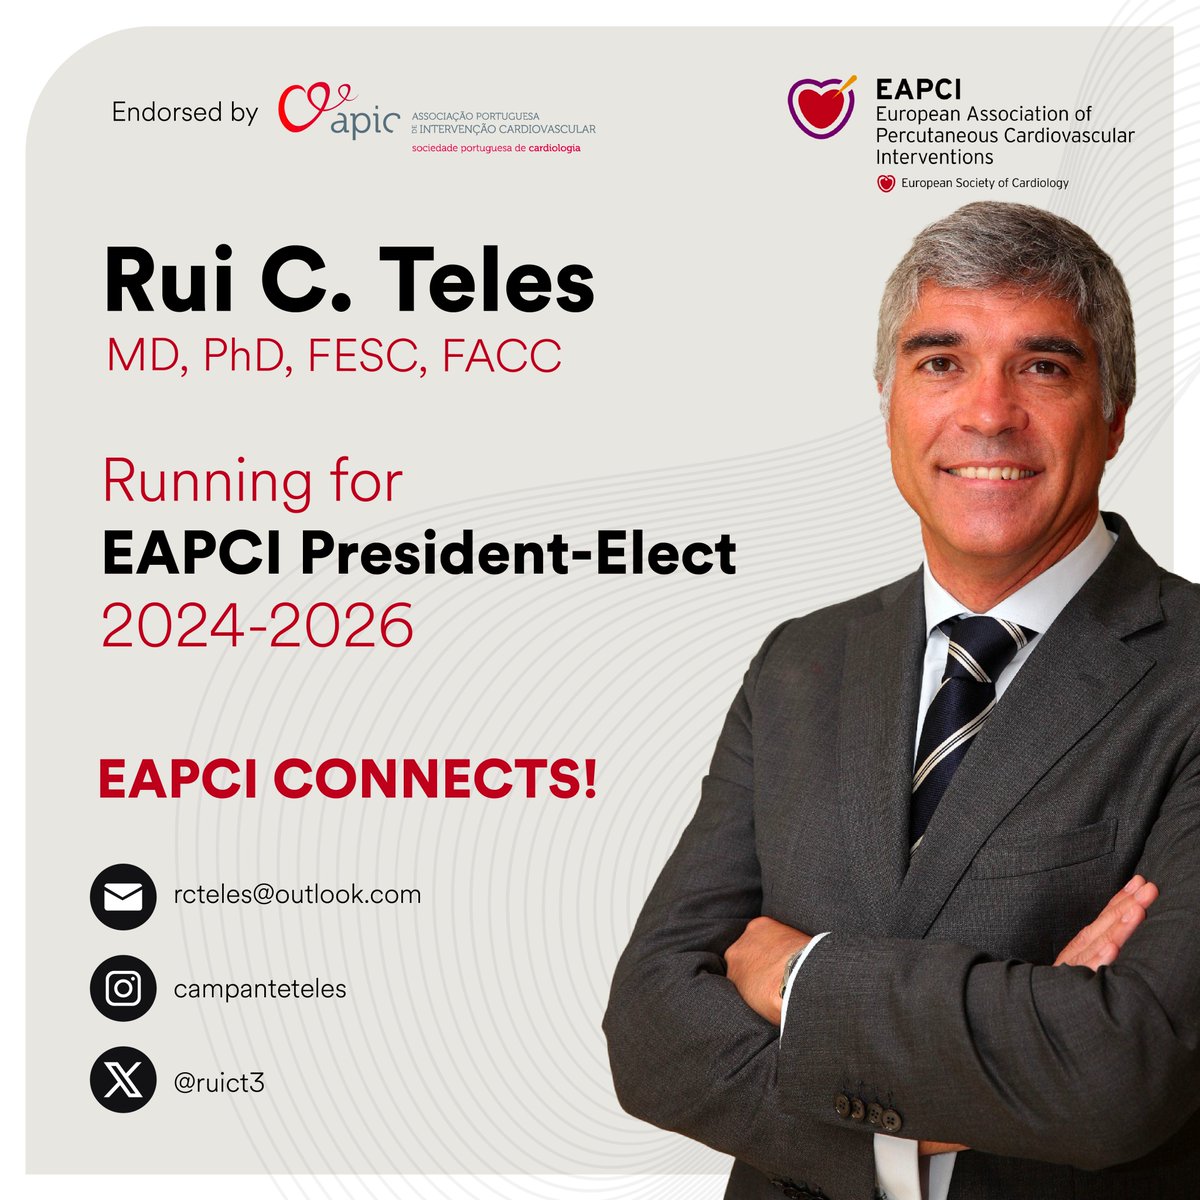 🔔 We are proud to support Rui Teles, APIC's Past President, as candidate for EAPCI President-Elect 2026-2028.

Read more at ruicteles.pt

For more information about the EAPCI elections   please visit shorturl.at/cFKPR

#EAPCI #InterventionalCardiology…